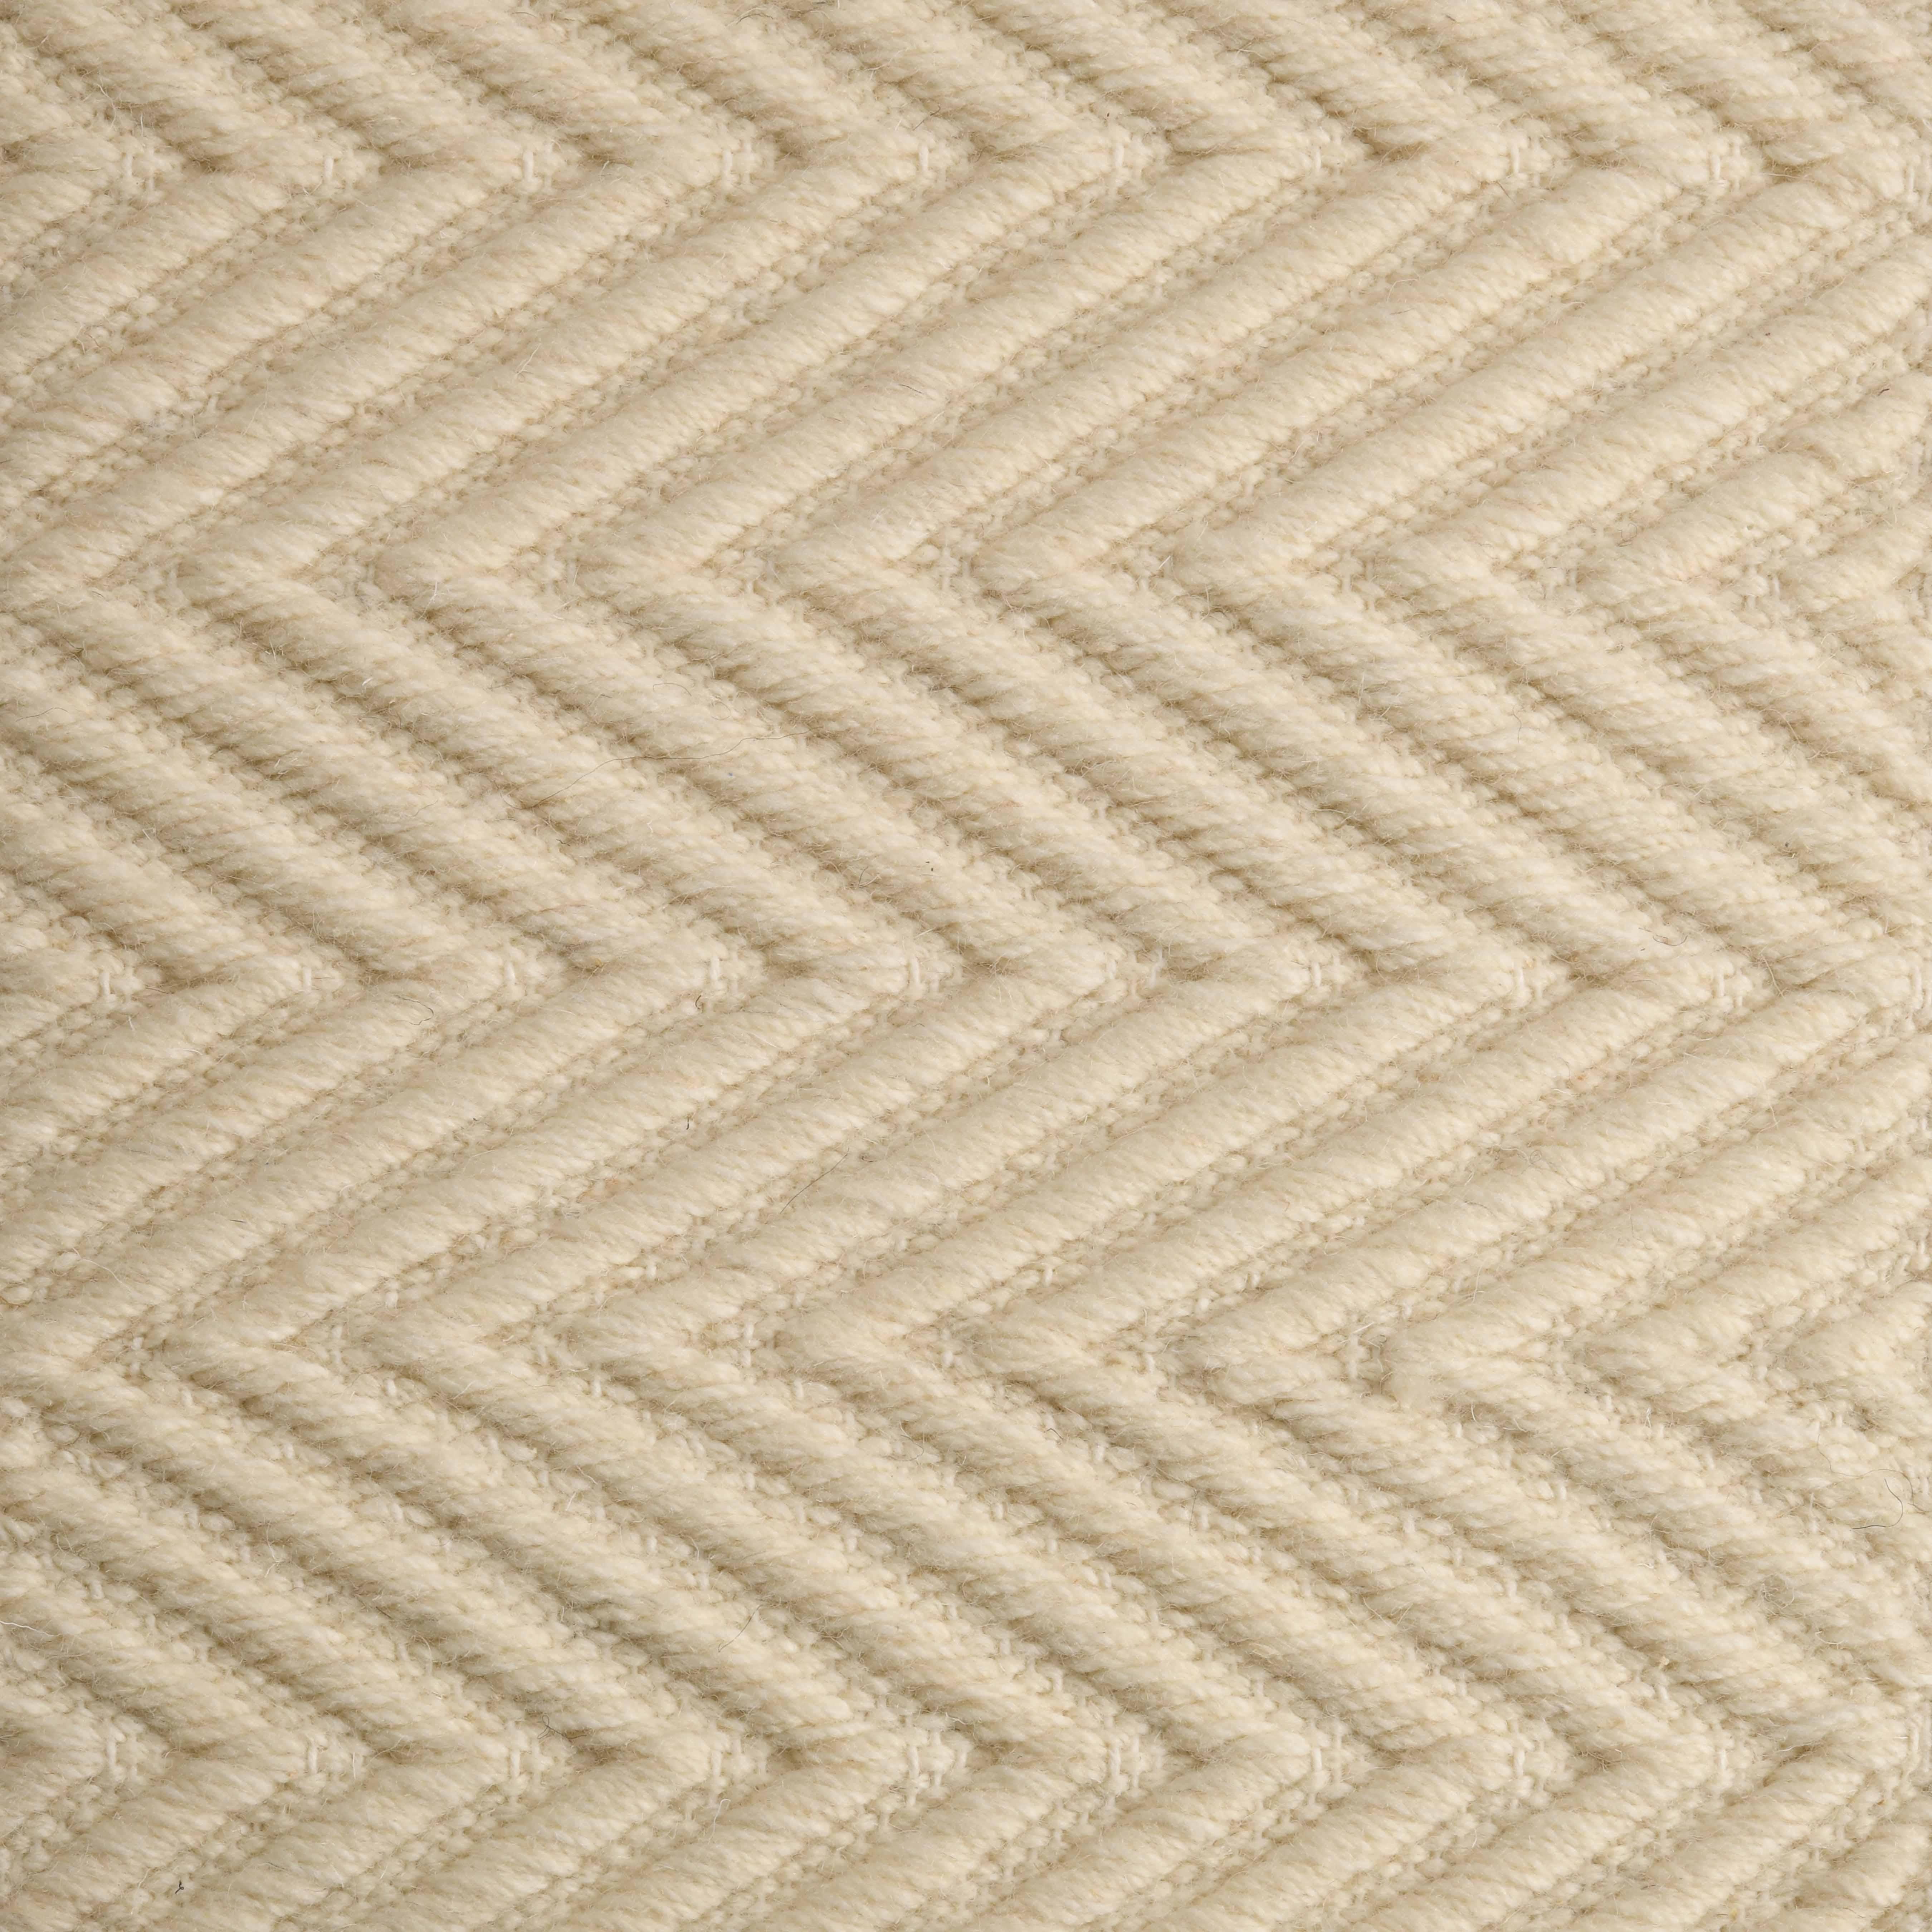 Lanx, Ivory, Handwoven Face 60% Undyed NZ Wool, 40% Undyed MED Wool, 8' x 10'